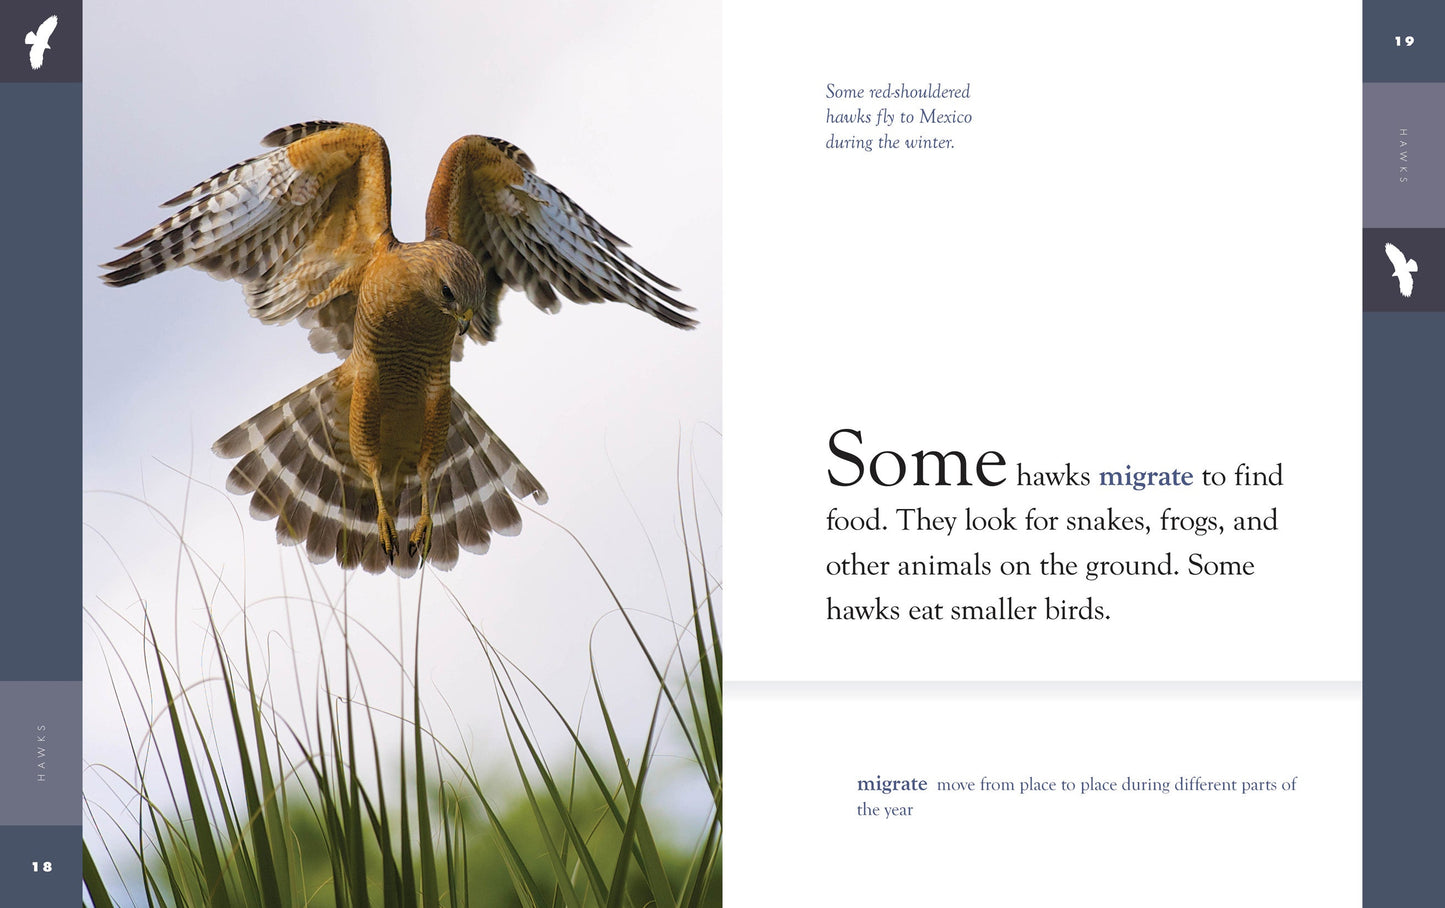 Amazing Animals - New Edition: Hawks by The Creative Company Shop